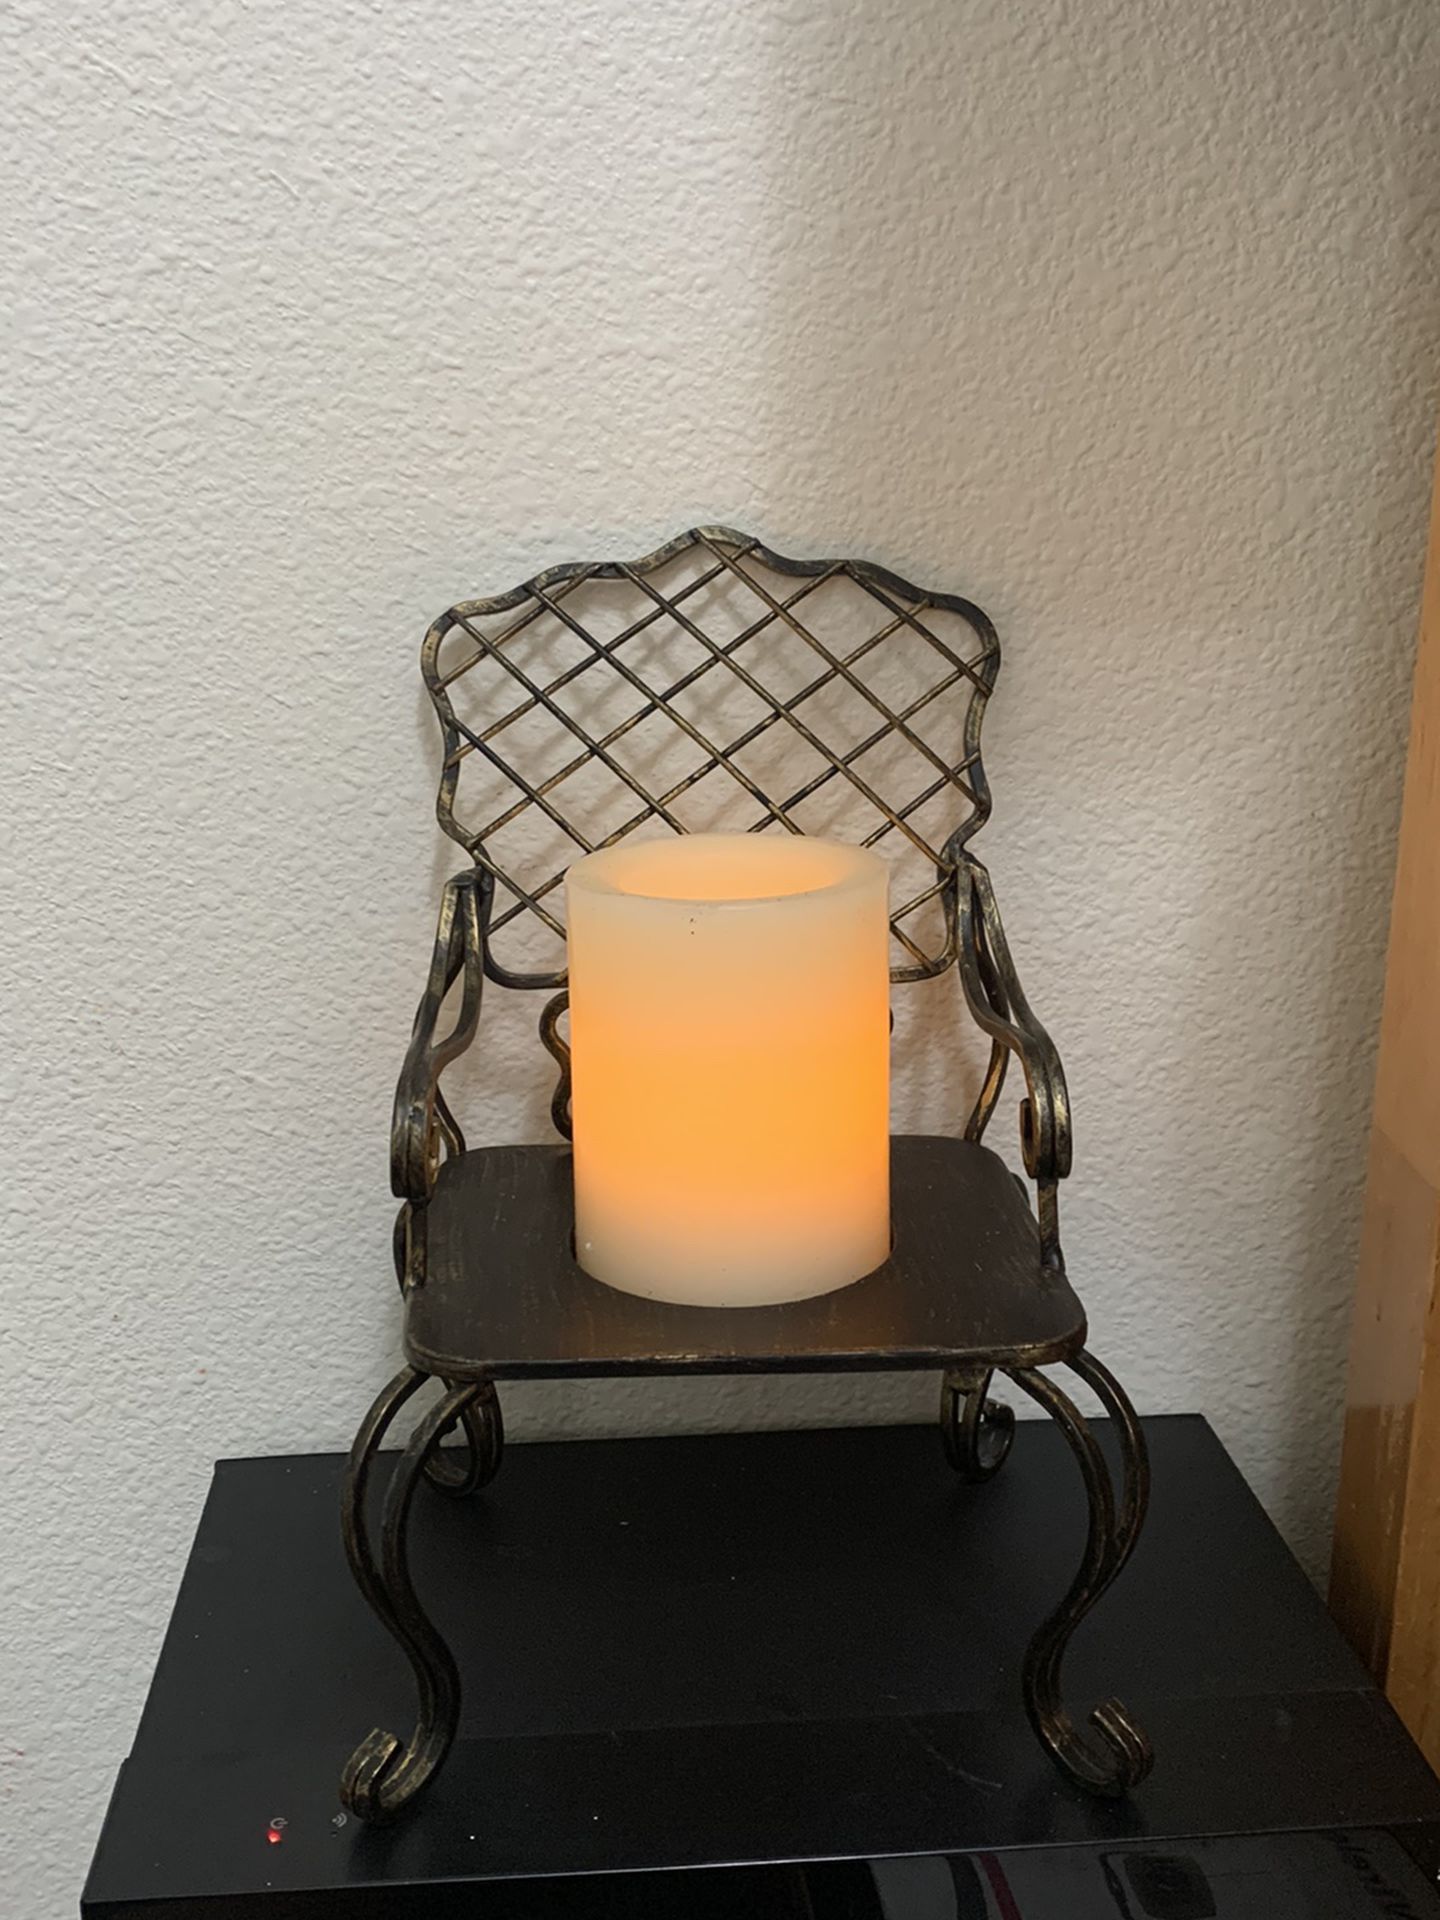 Vintage Chair With Candle 🕯